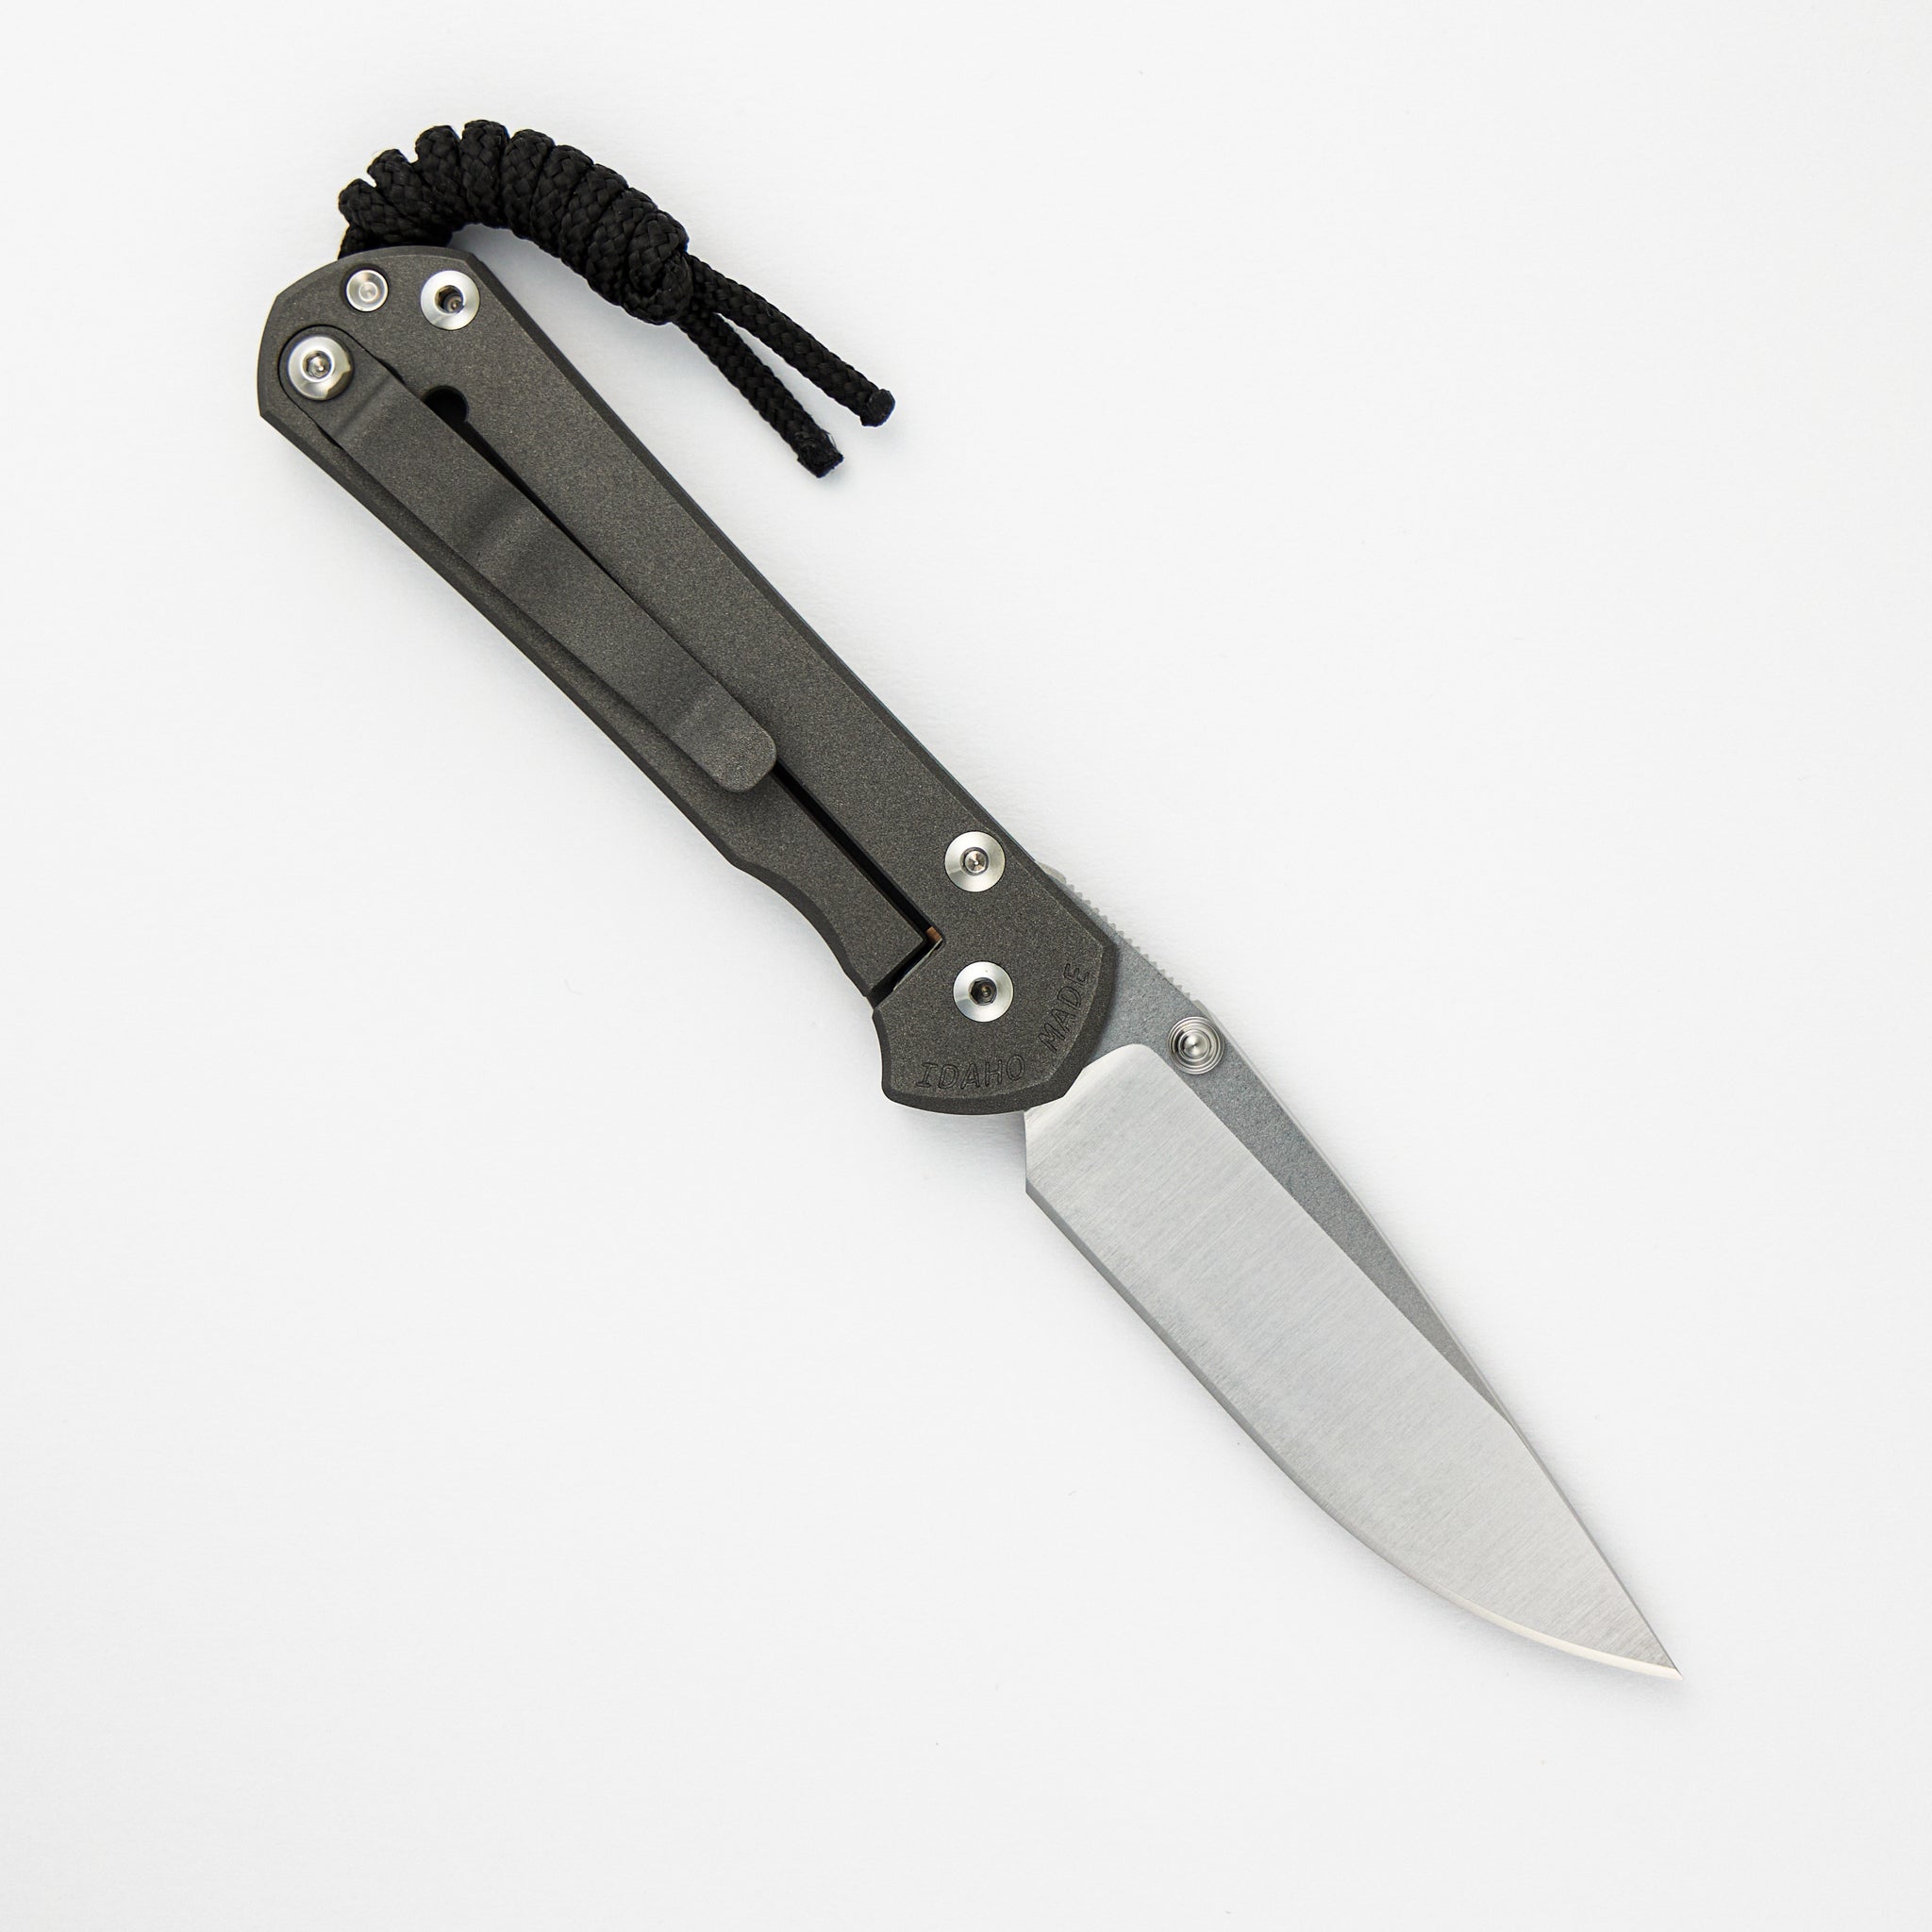 CHRIS REEVE SMALL SEBENZA 31 – POLISHED CPM MAGNACUT BLADE – SILVER DOUBLE THUMB LUGS